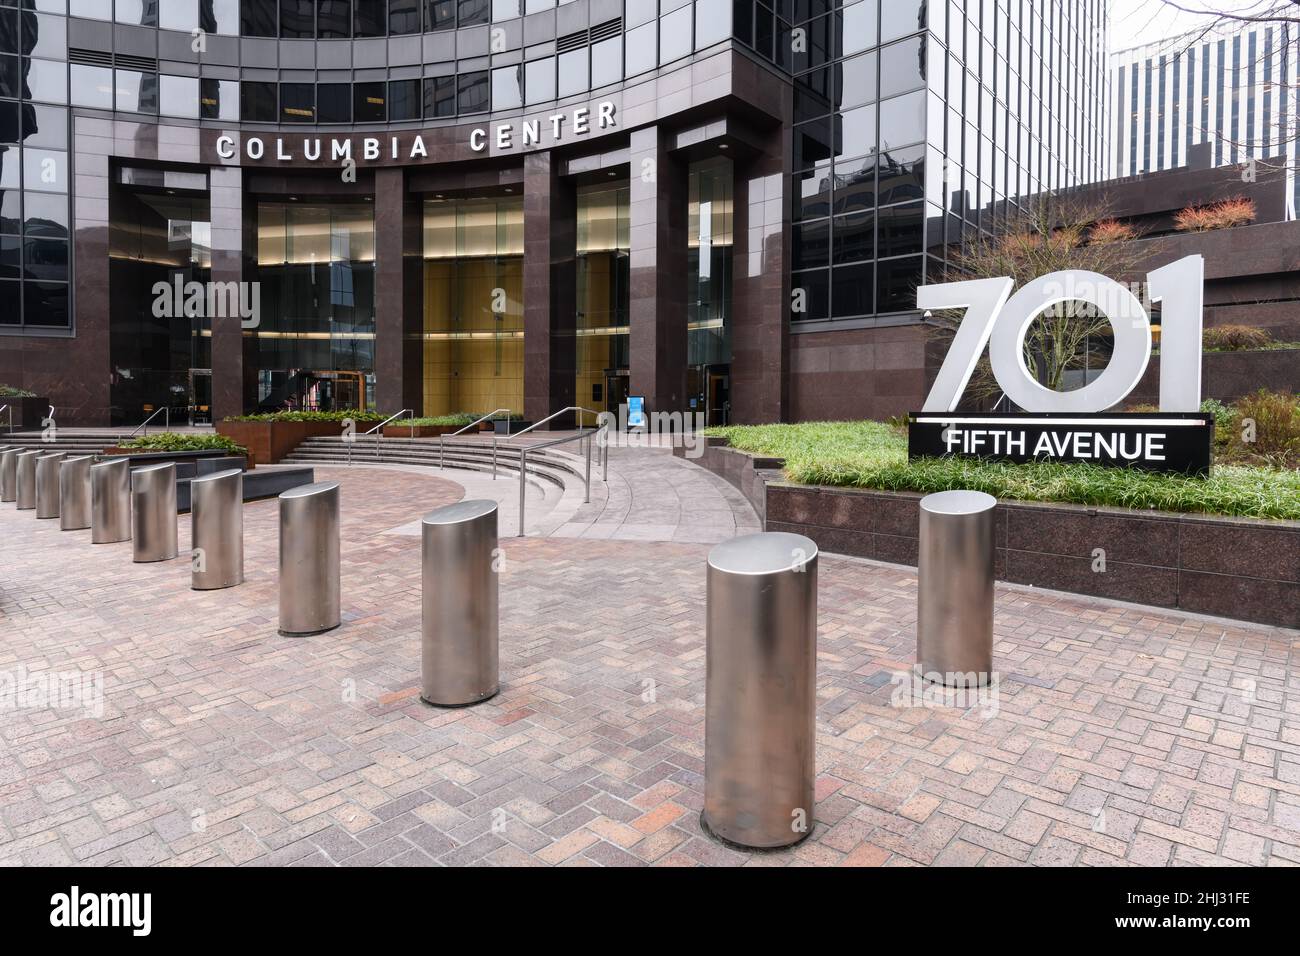 Seattle - January 23, 2022; Address sign of 701 Fifth Avenue for the Columbia Center skyscraper in downtown Seattle with security posts Stock Photo